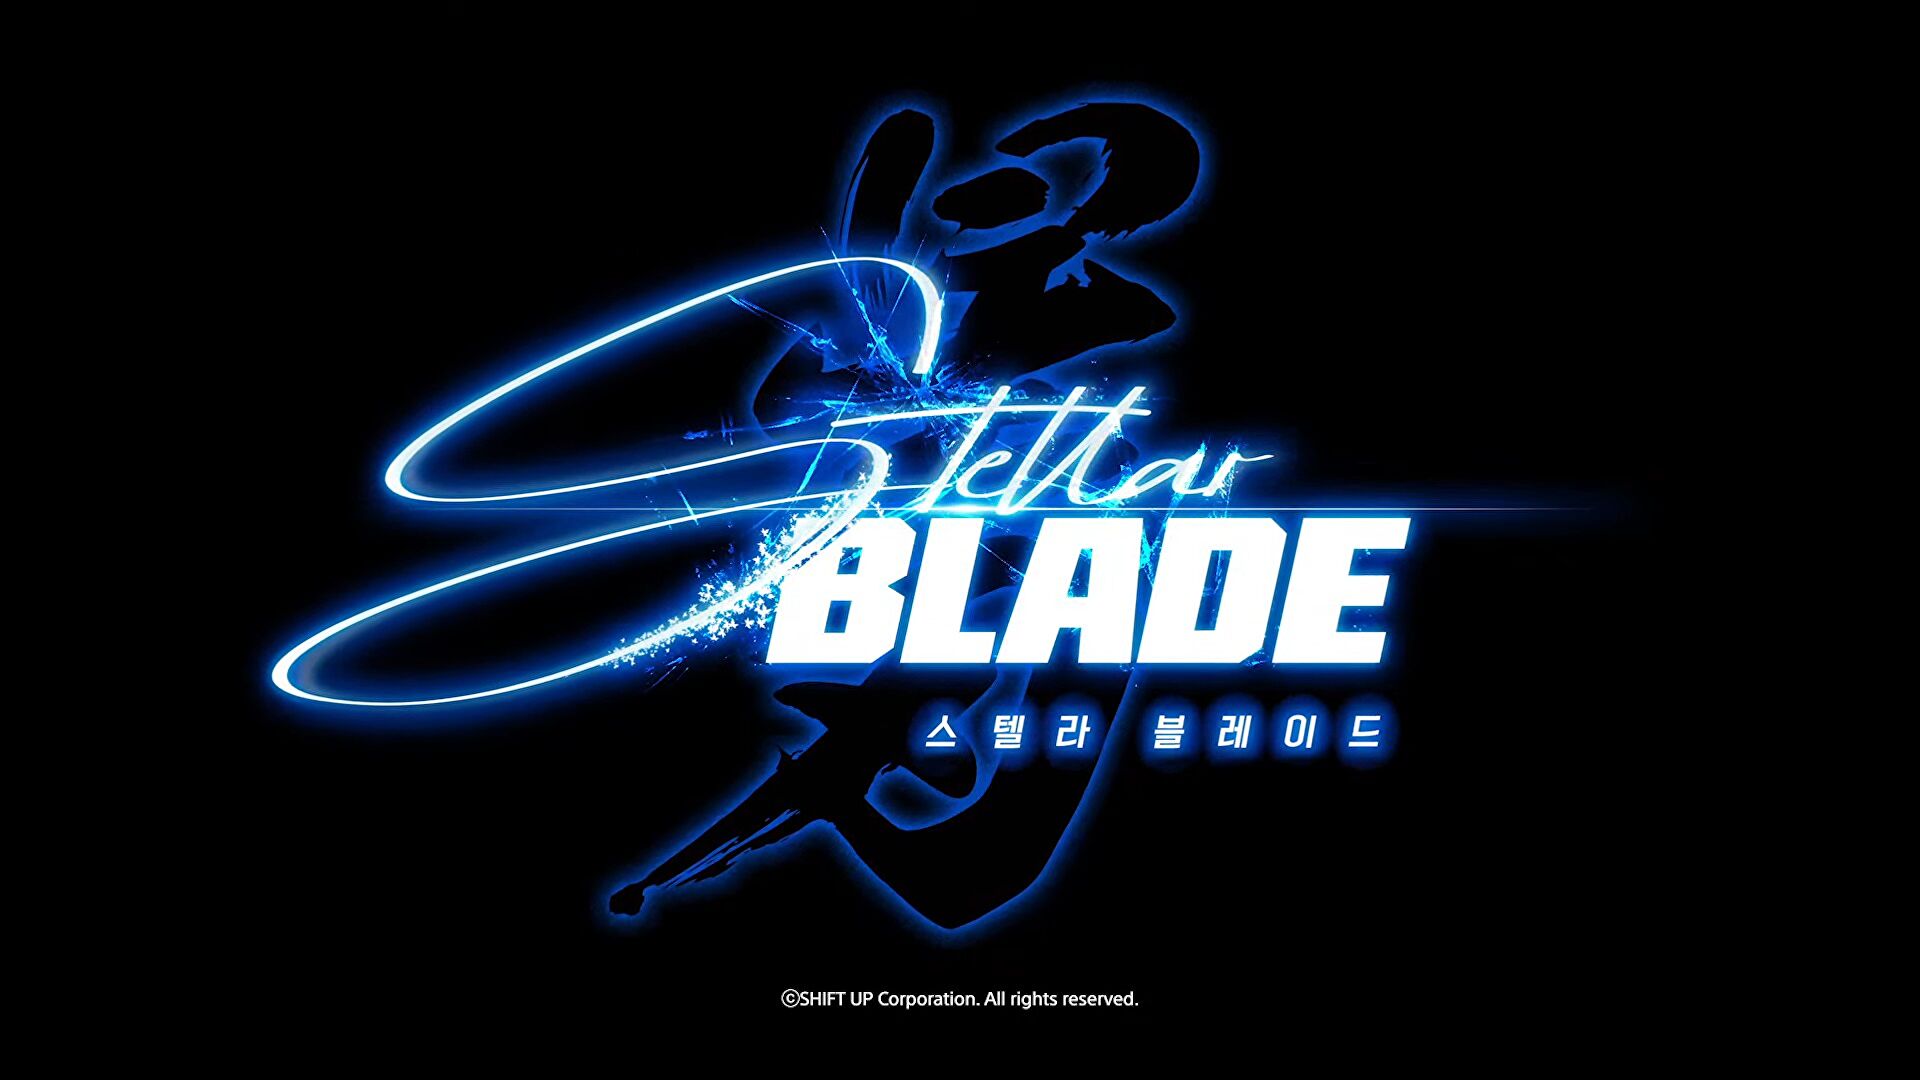 Stellar Blade gameplay trailer brings some character-action goodness to the Sony State of Play